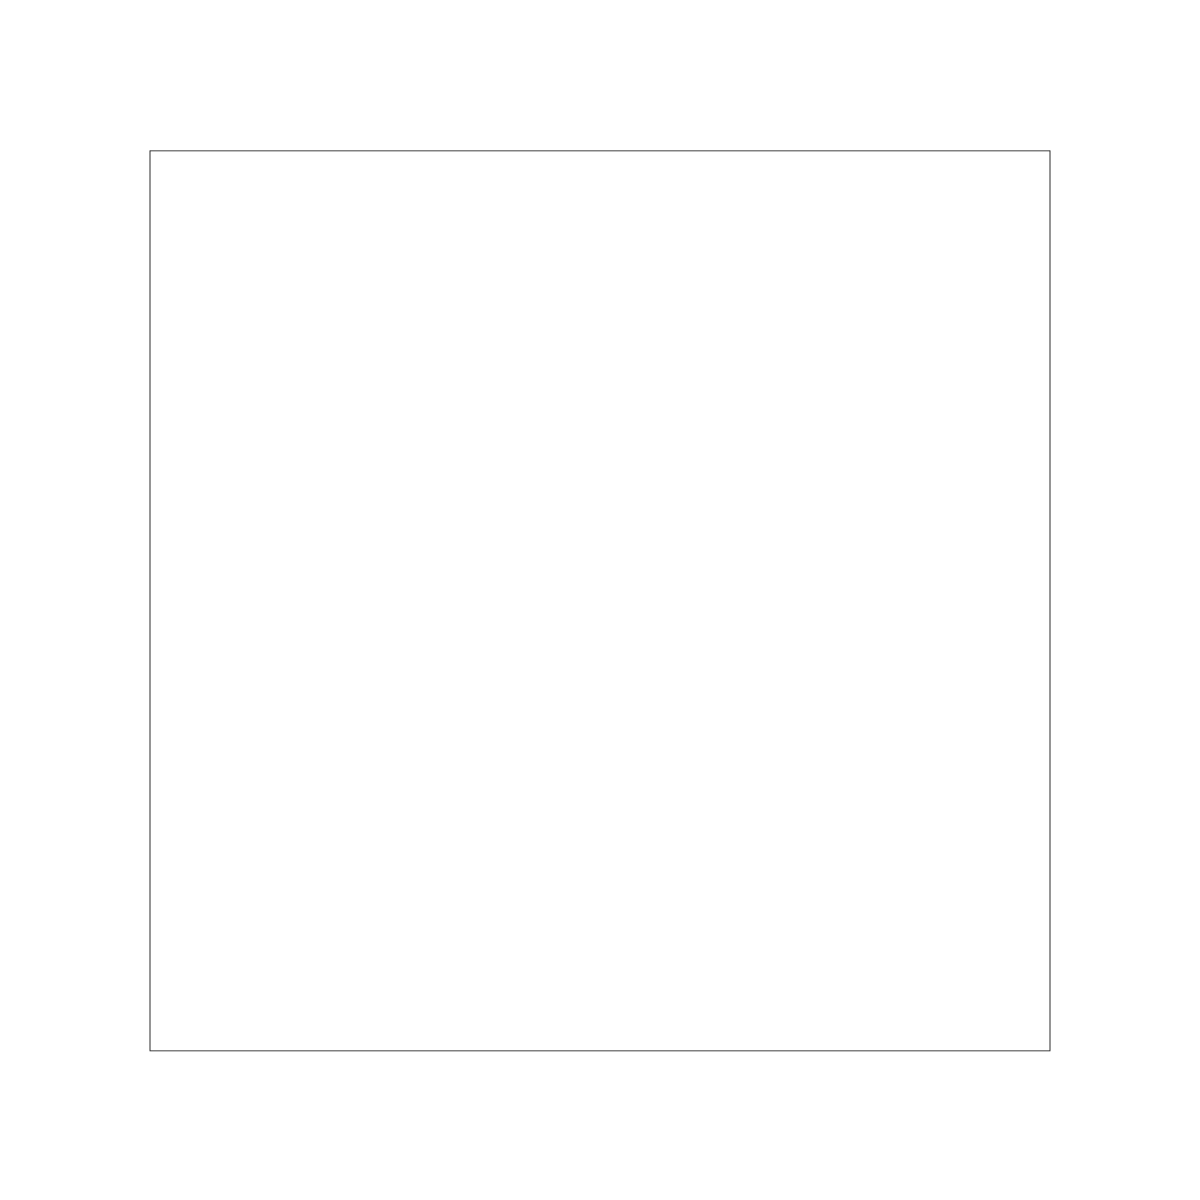 Craft Plastic Sheet Pack, White - 4 sheets per pack